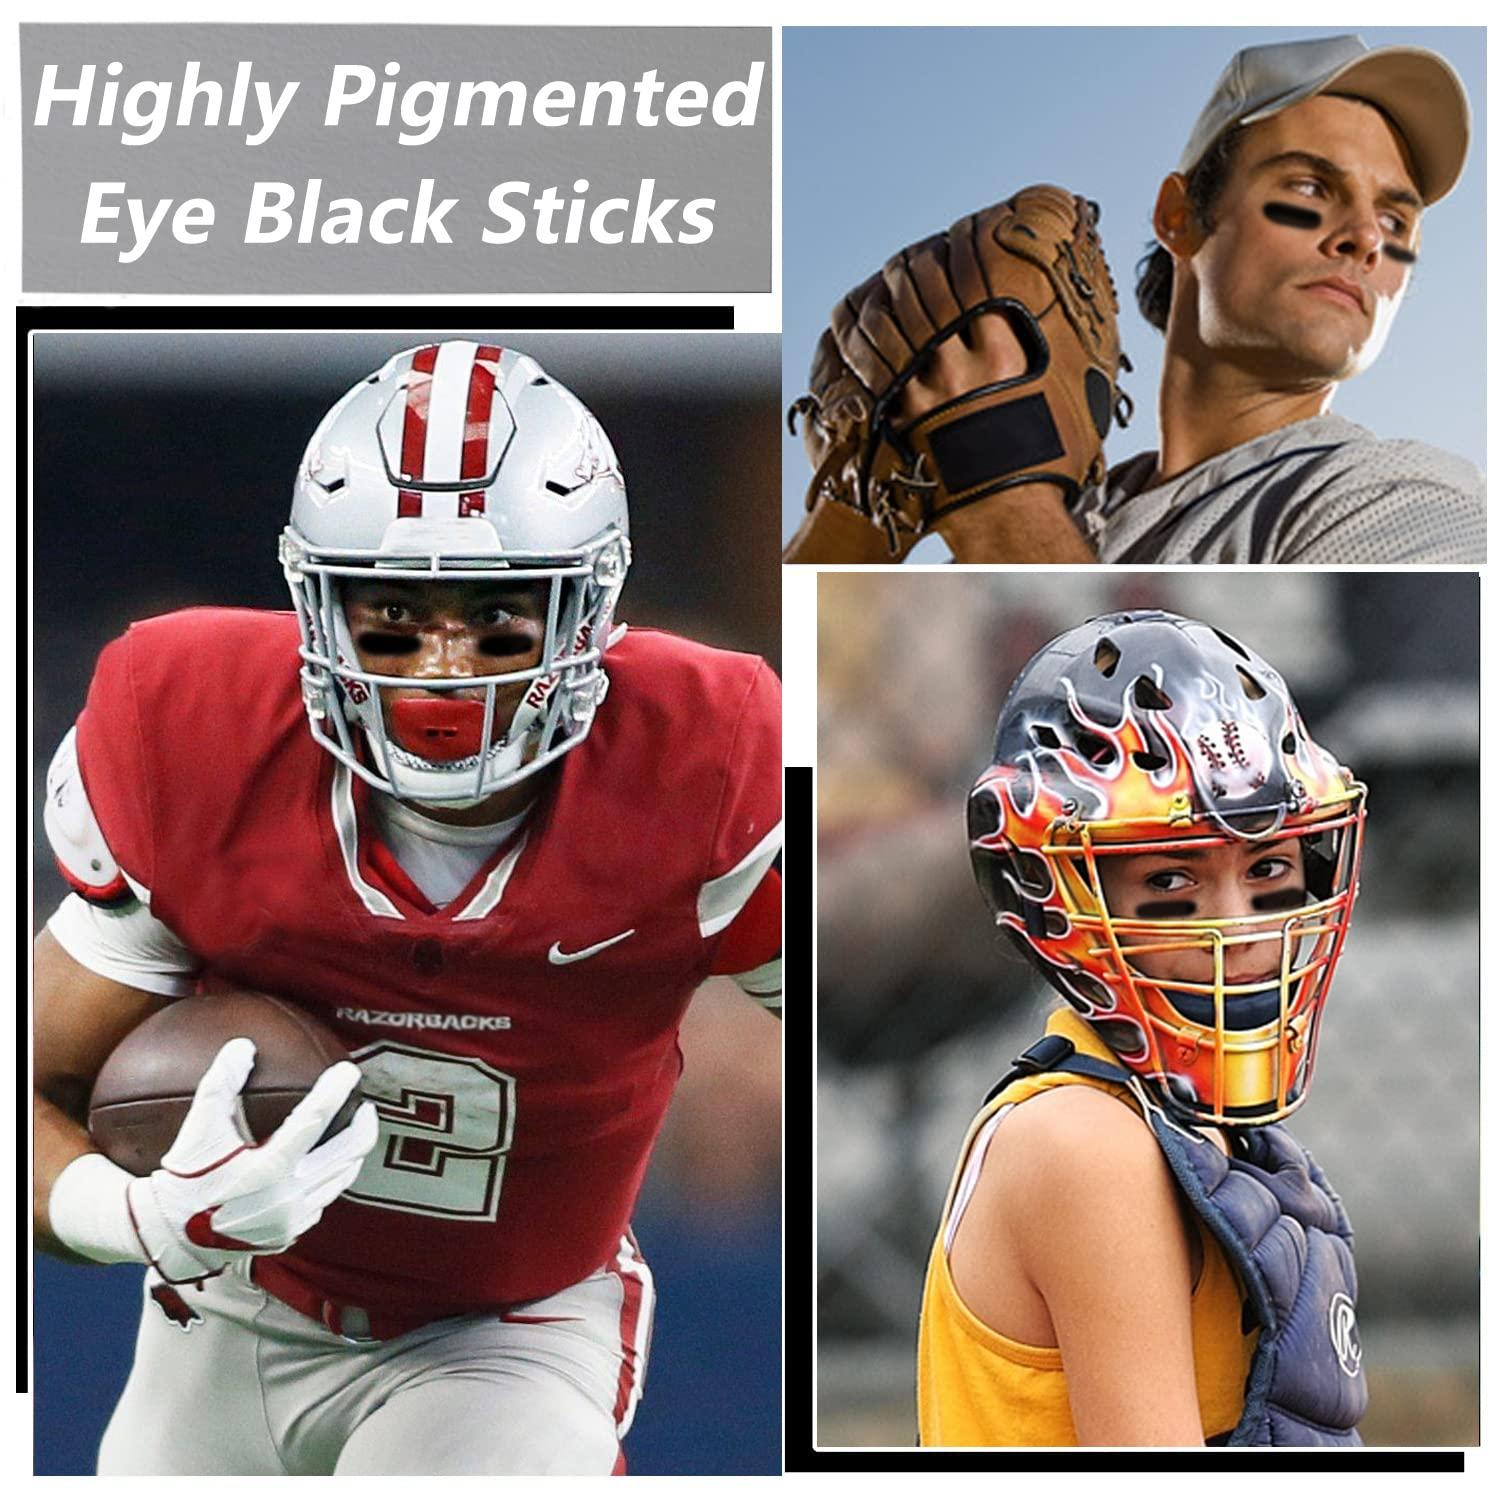 HOW TO GET THE BEST EYEBLACK 